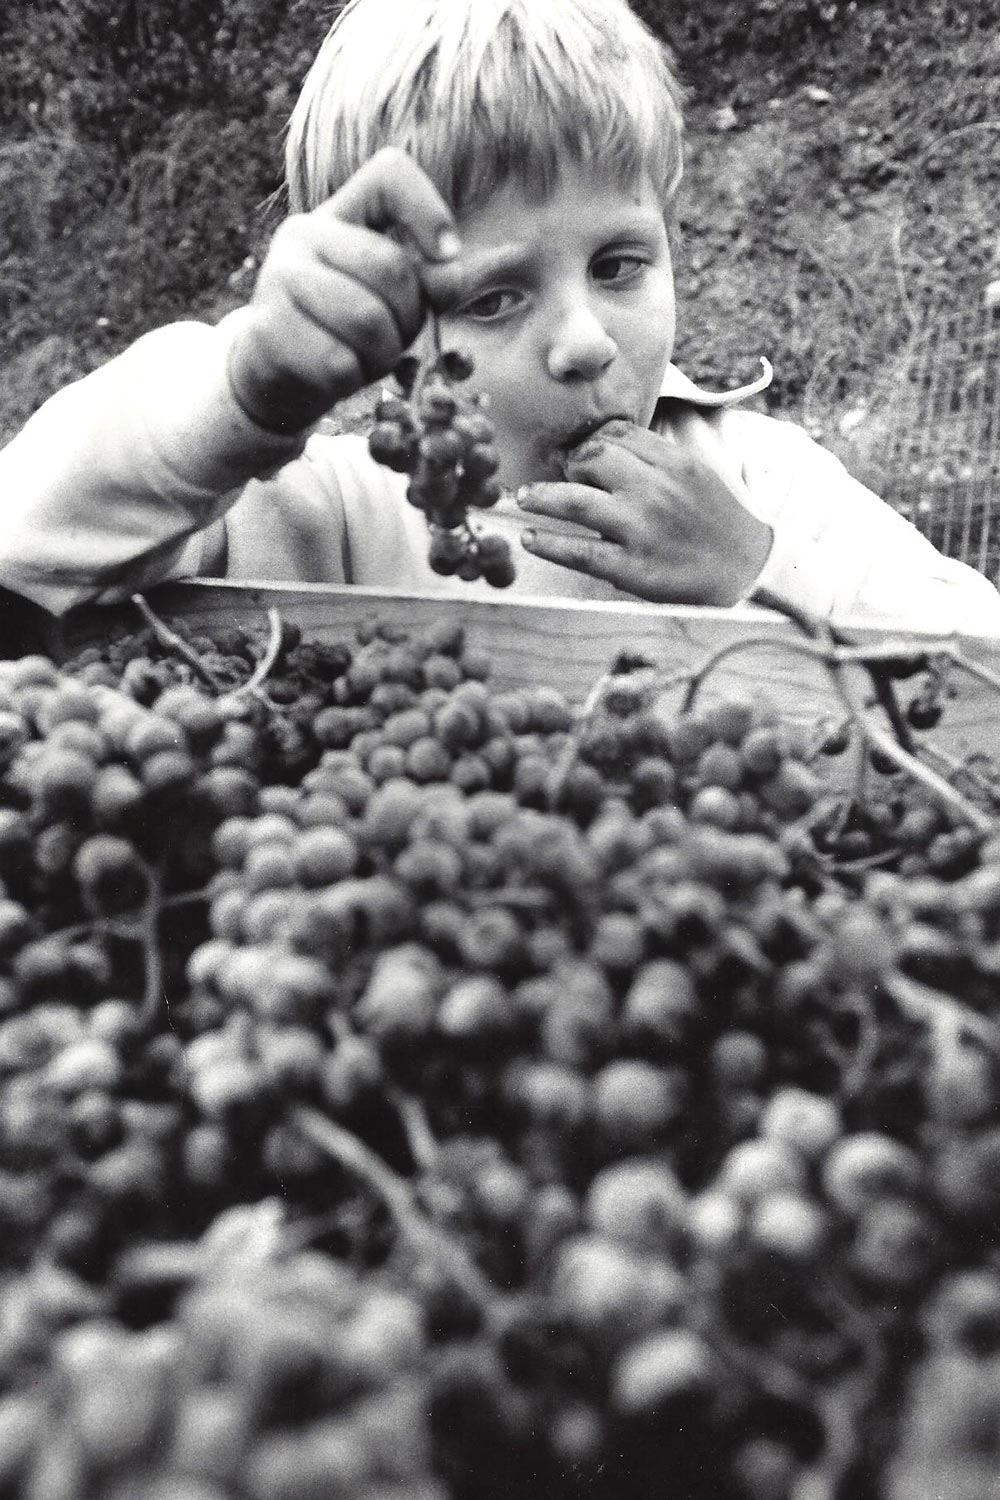 Black and white photo of a young boy behind a crate of grapes. He's holding up a bunch of grapes in one hand while eating some grapes with the other.